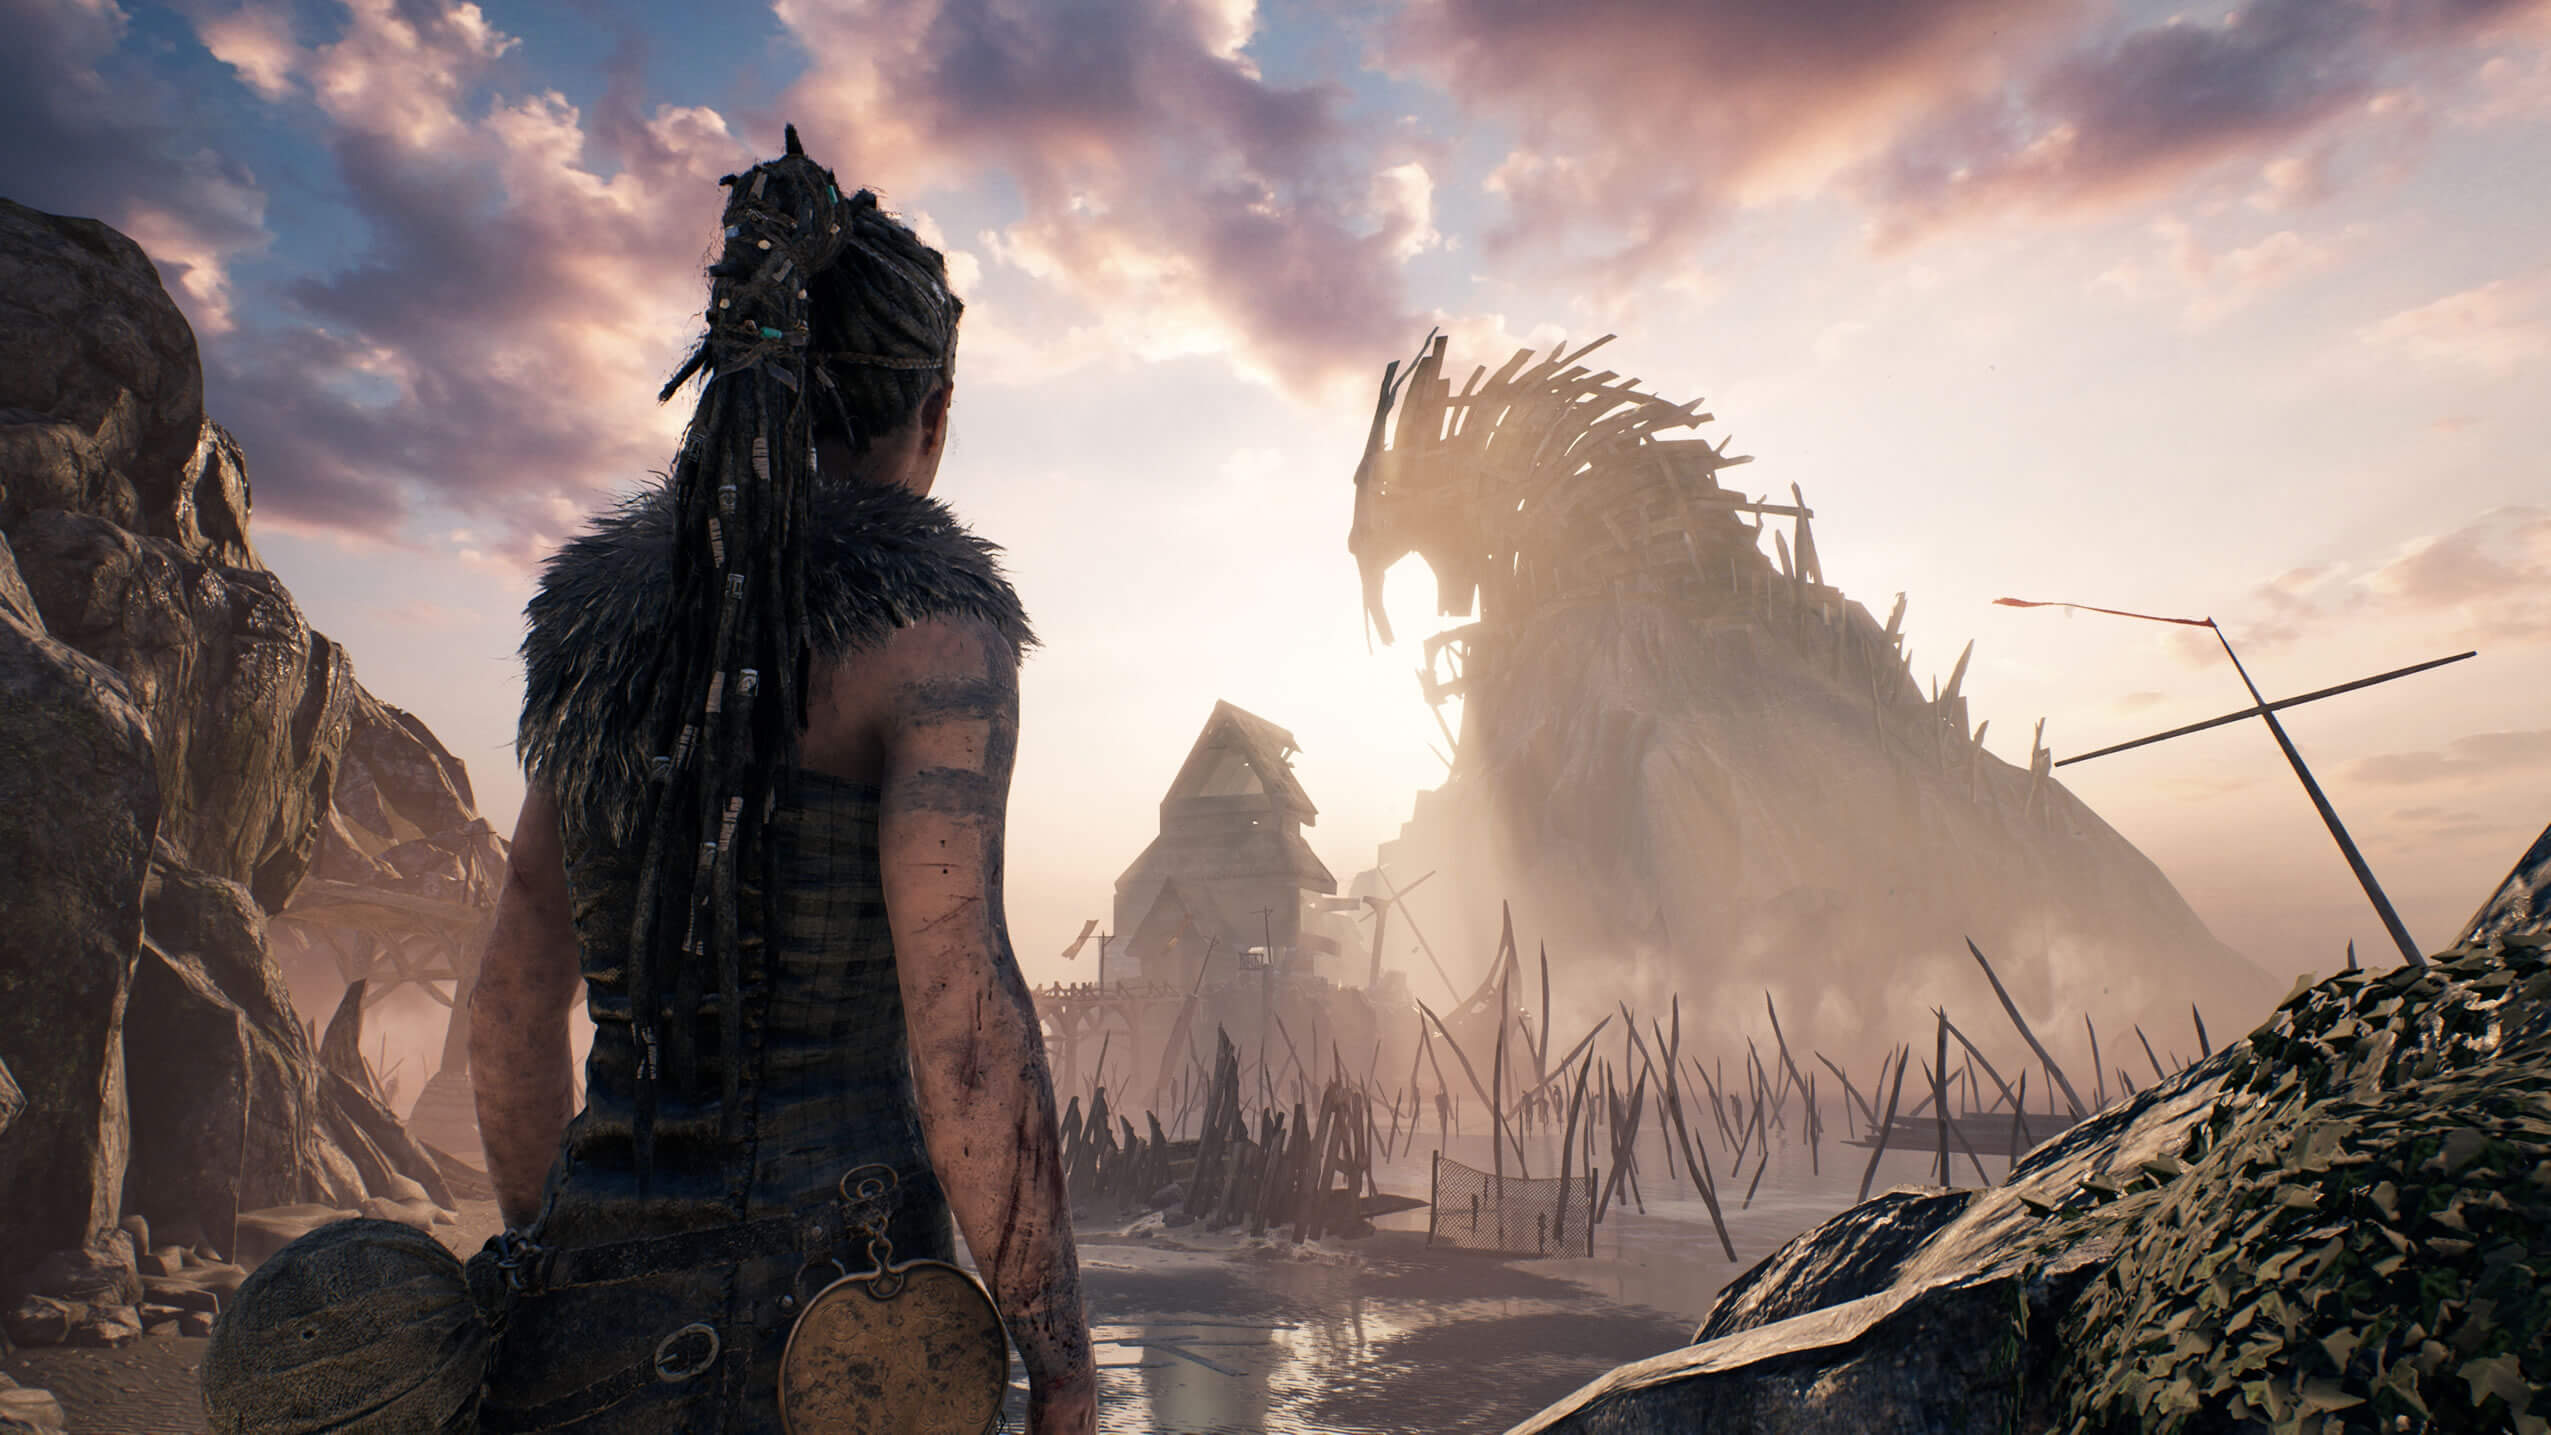 Hellblade: Senua's Sacrifice is biggest winner at BAFTA awards, but What Remains of Edith Finch takes top honor